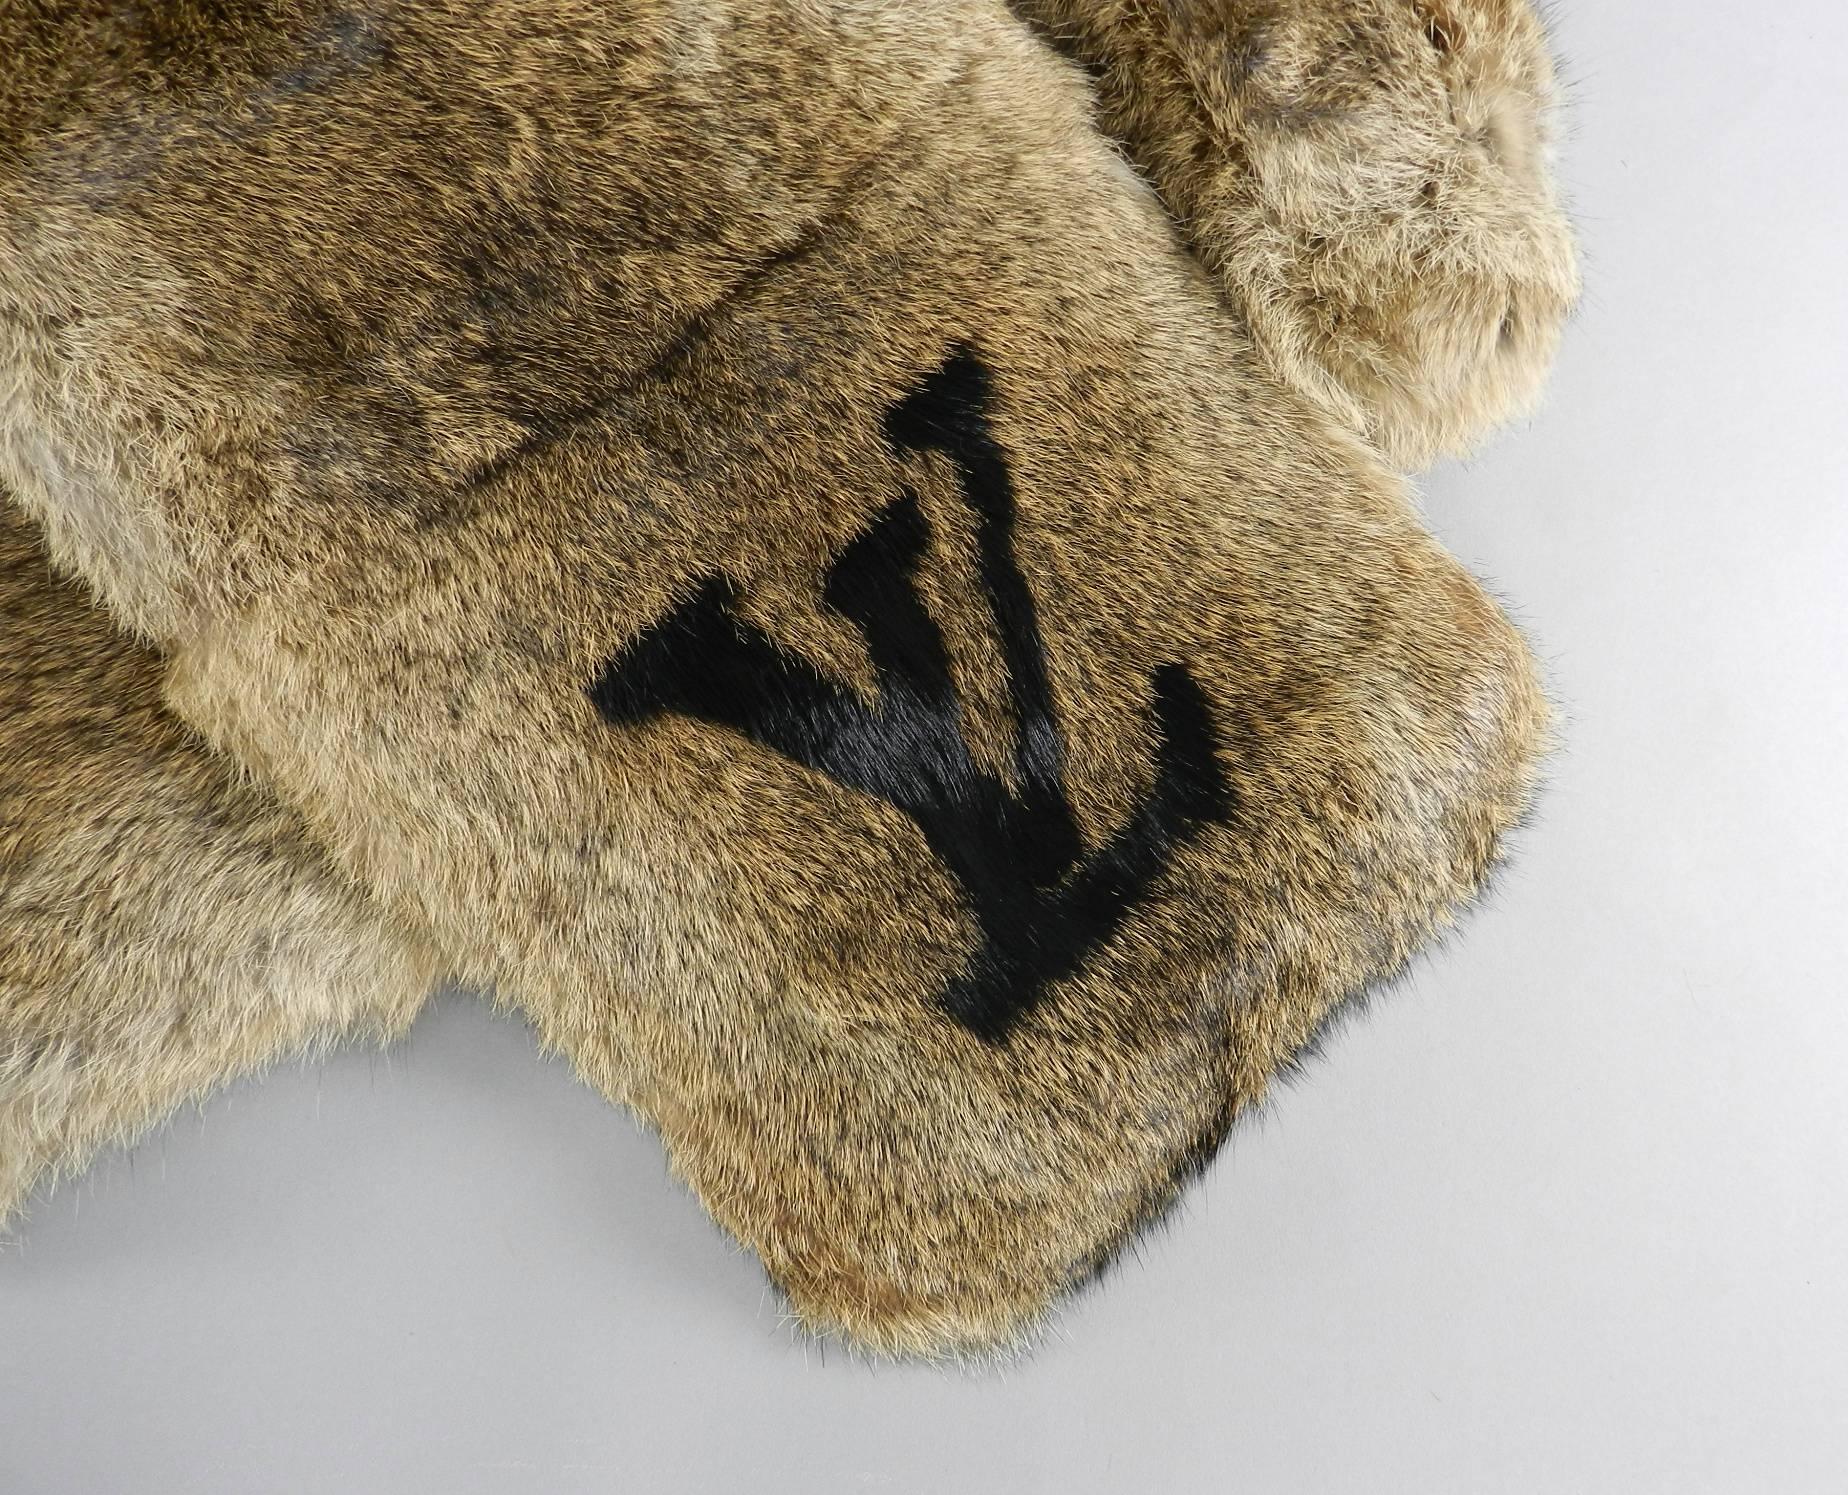 Louis Vuitton Fur Scarves - 2 For Sale on 1stDibs